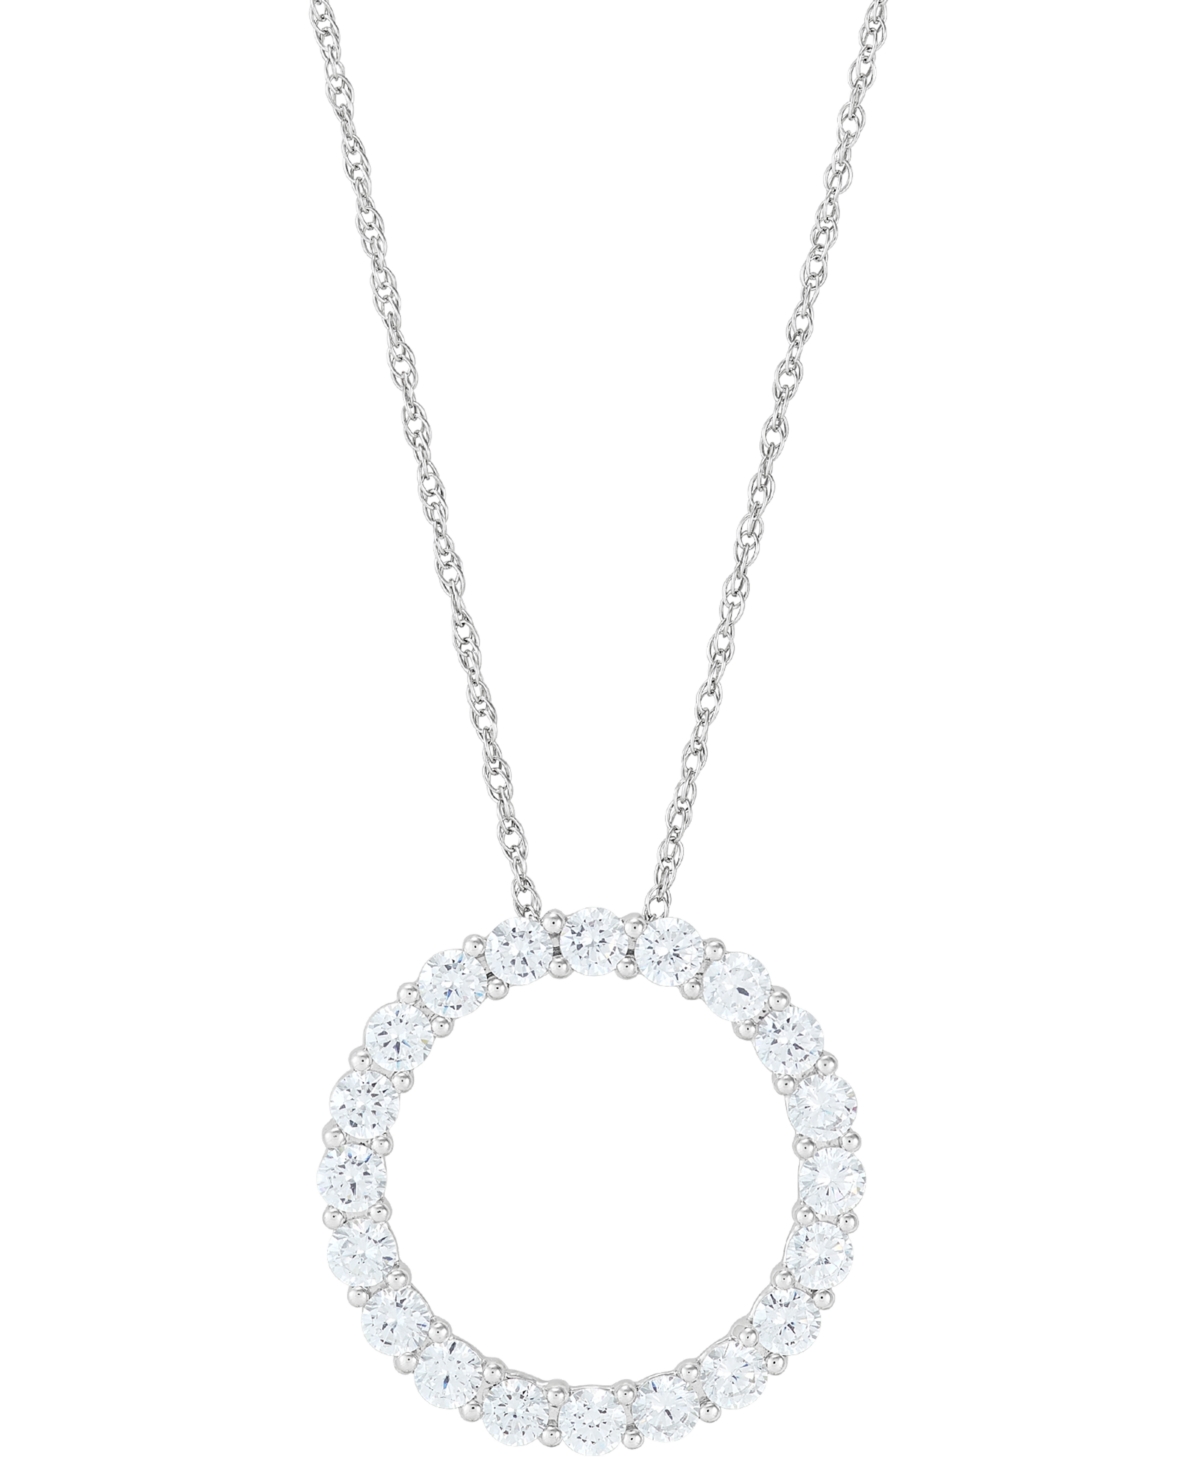 Lab Grown Diamond Circle Pendant Necklace (2 ct. t.w.) in 14k White Gold, 16" + 2" extender - White Gold